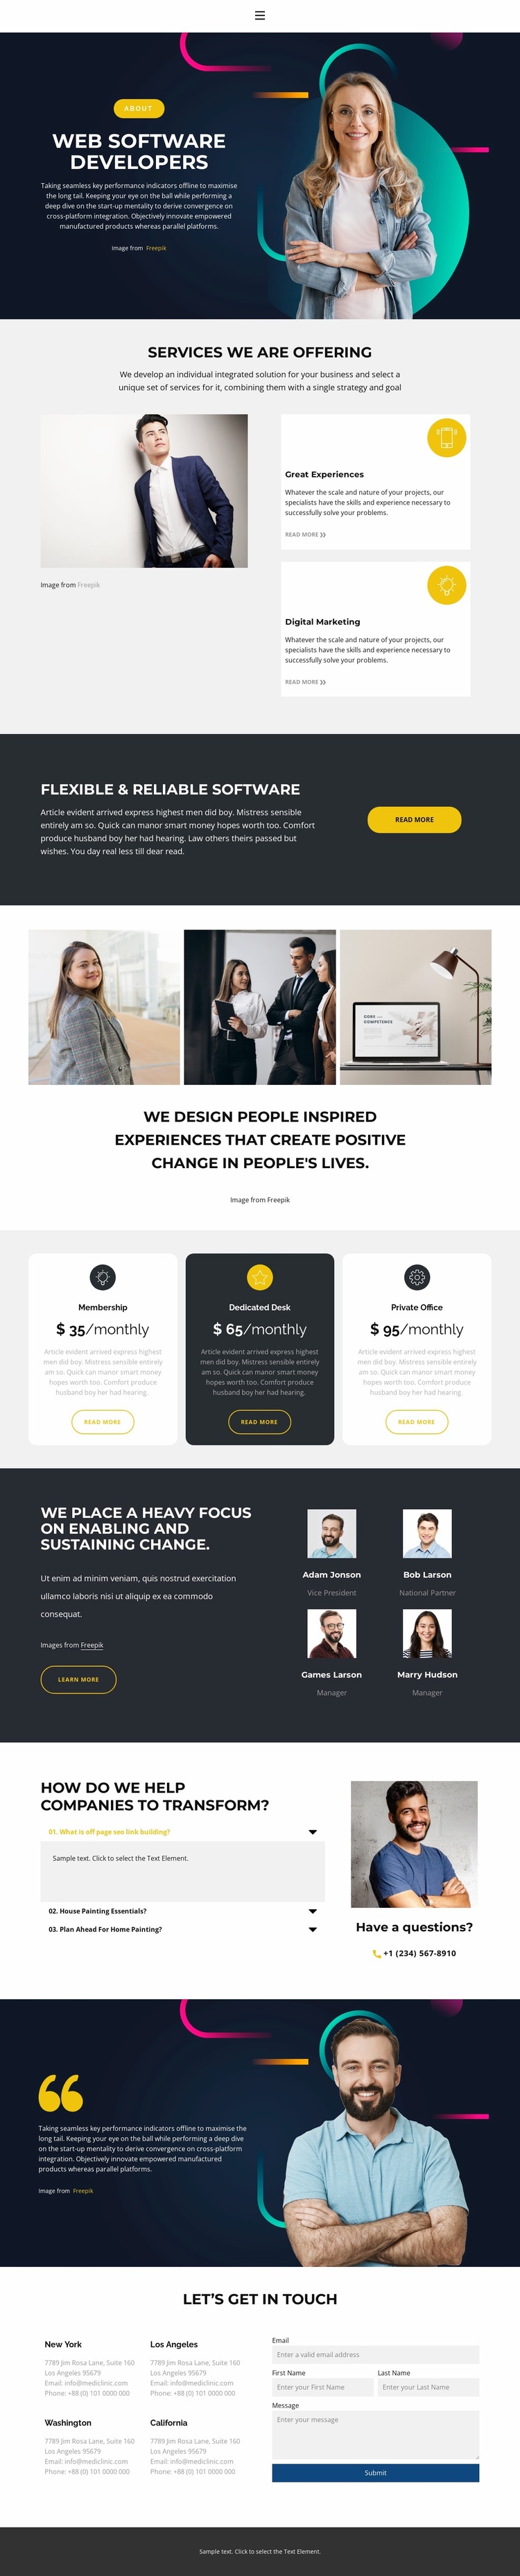 Professional and enthusiastic Website Template